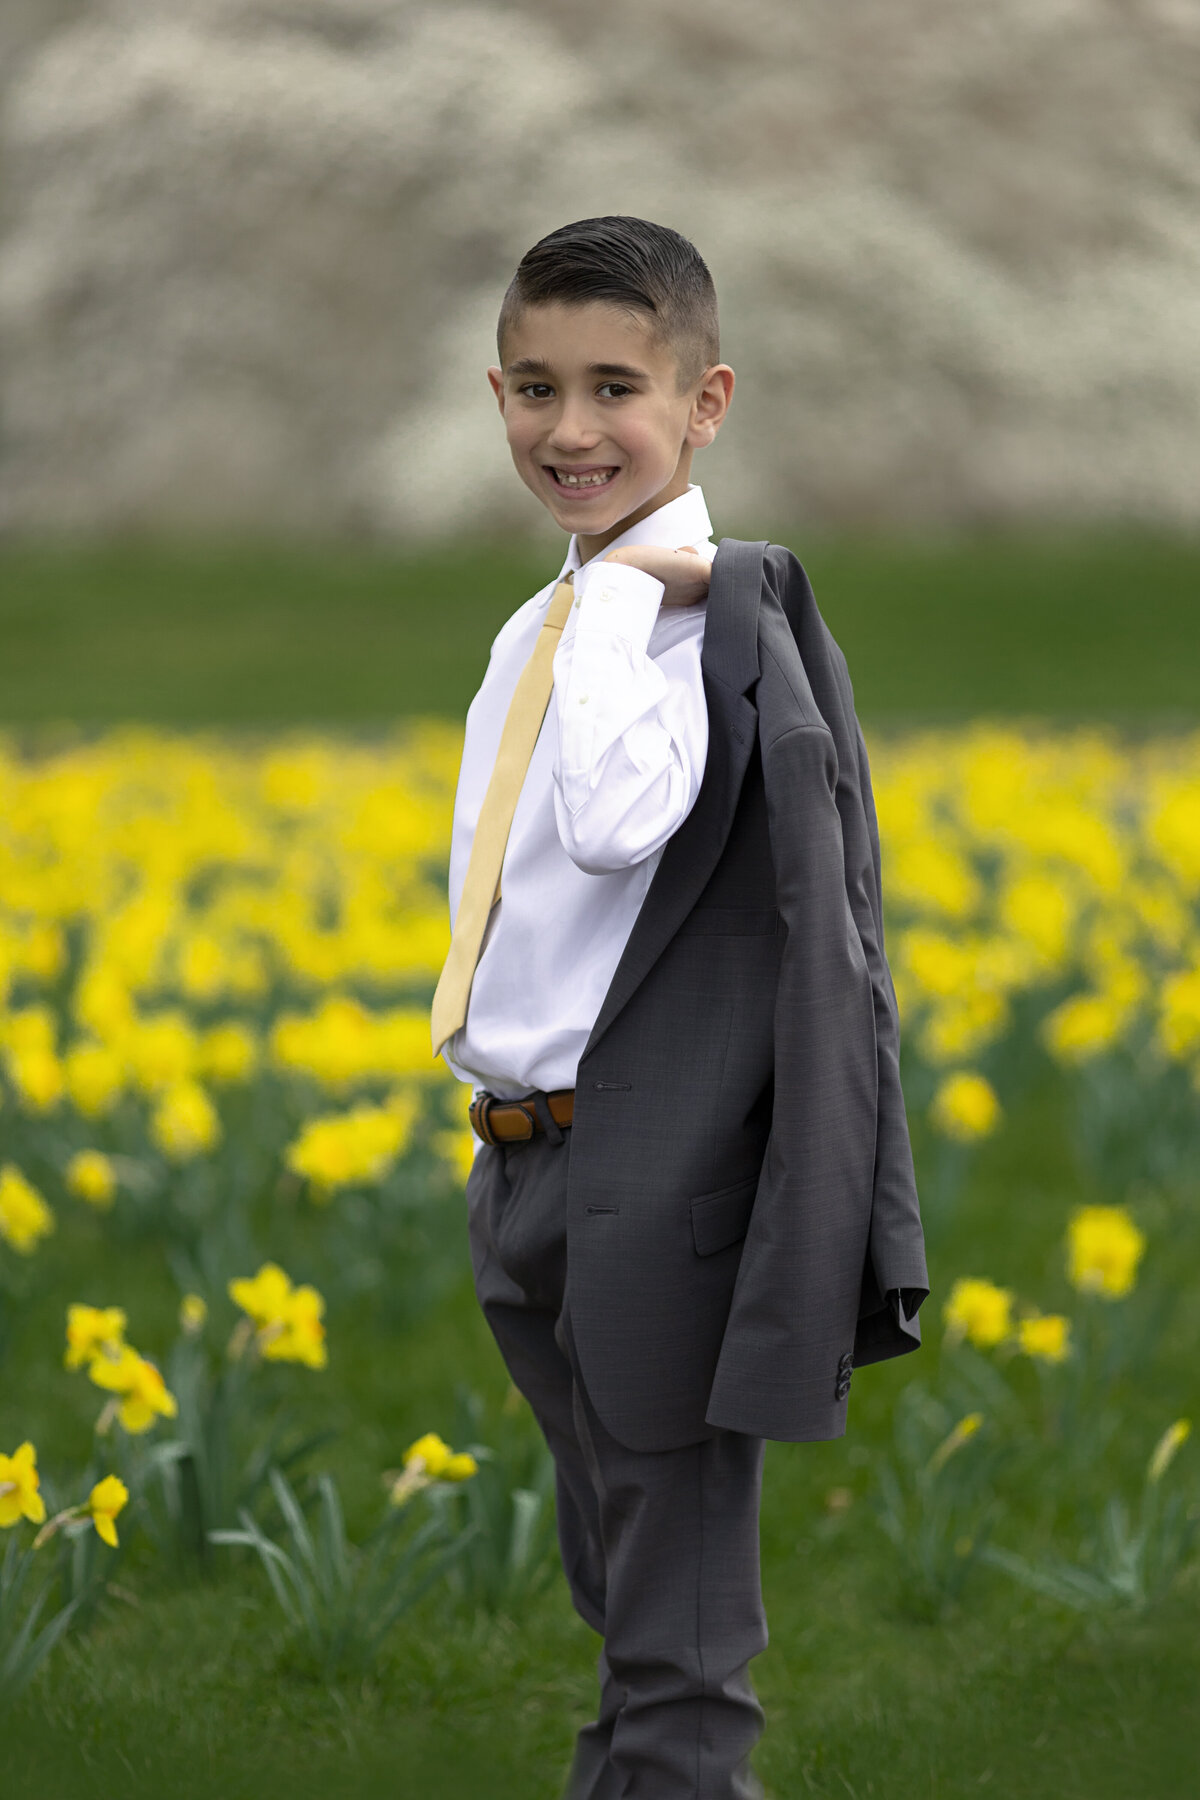 A boy in a grey suit walks through a field of yellow daffodils with his suit jacket over his shoulder